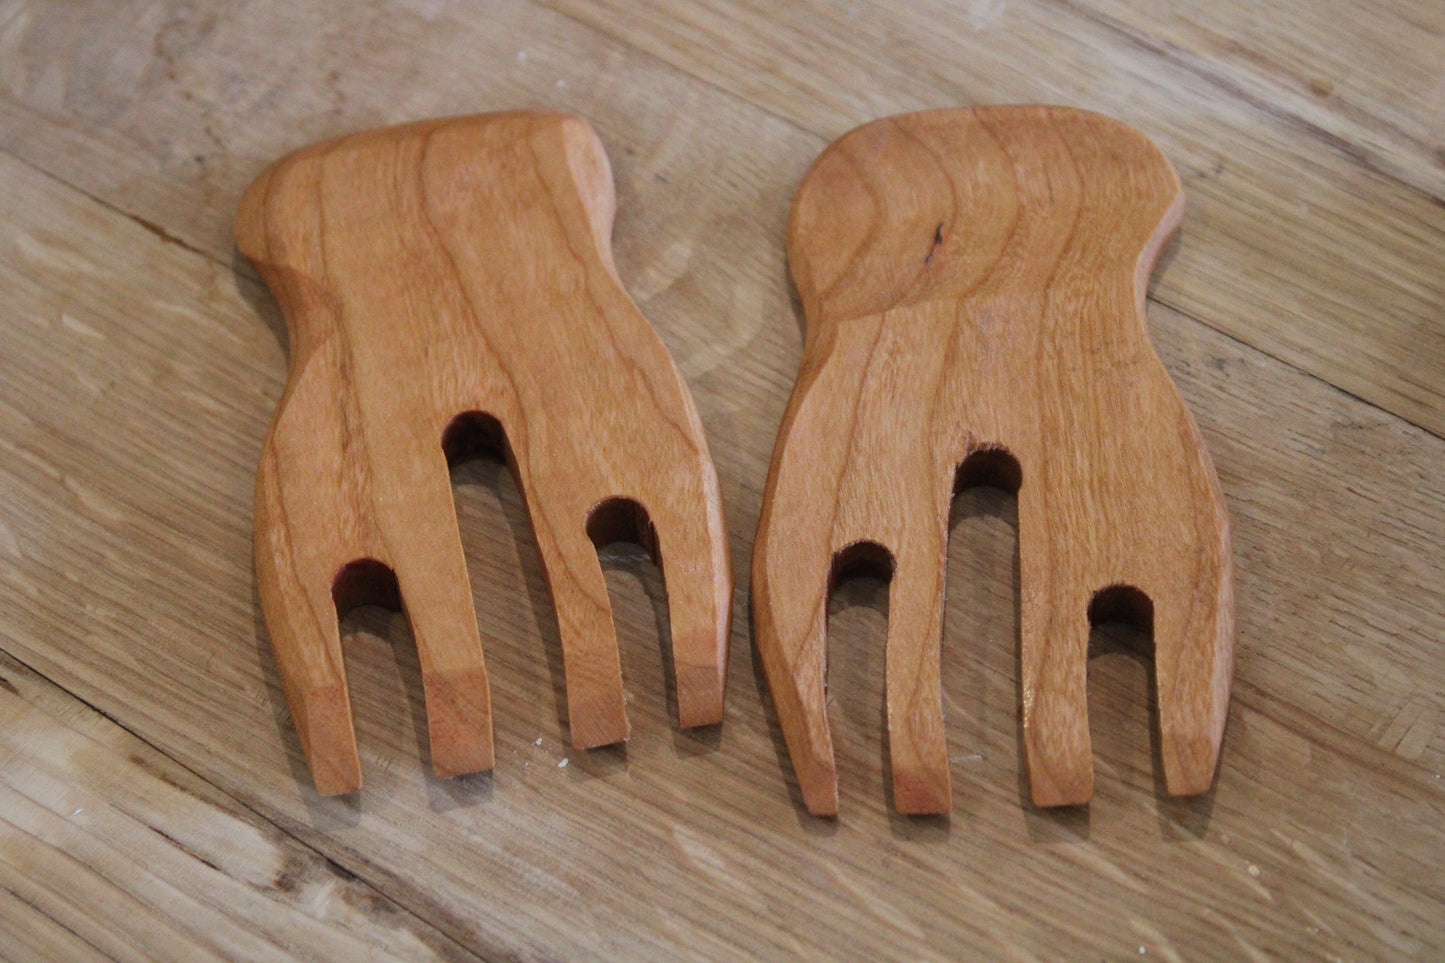 Salad / Pasta Tossing Claw Pair, Hardwood Cherry or Walnut Hardwood - Artisan Hand Carved - Good for salad, fruits, pasta and vegetables) (Sale Price: $42.49 CAD)